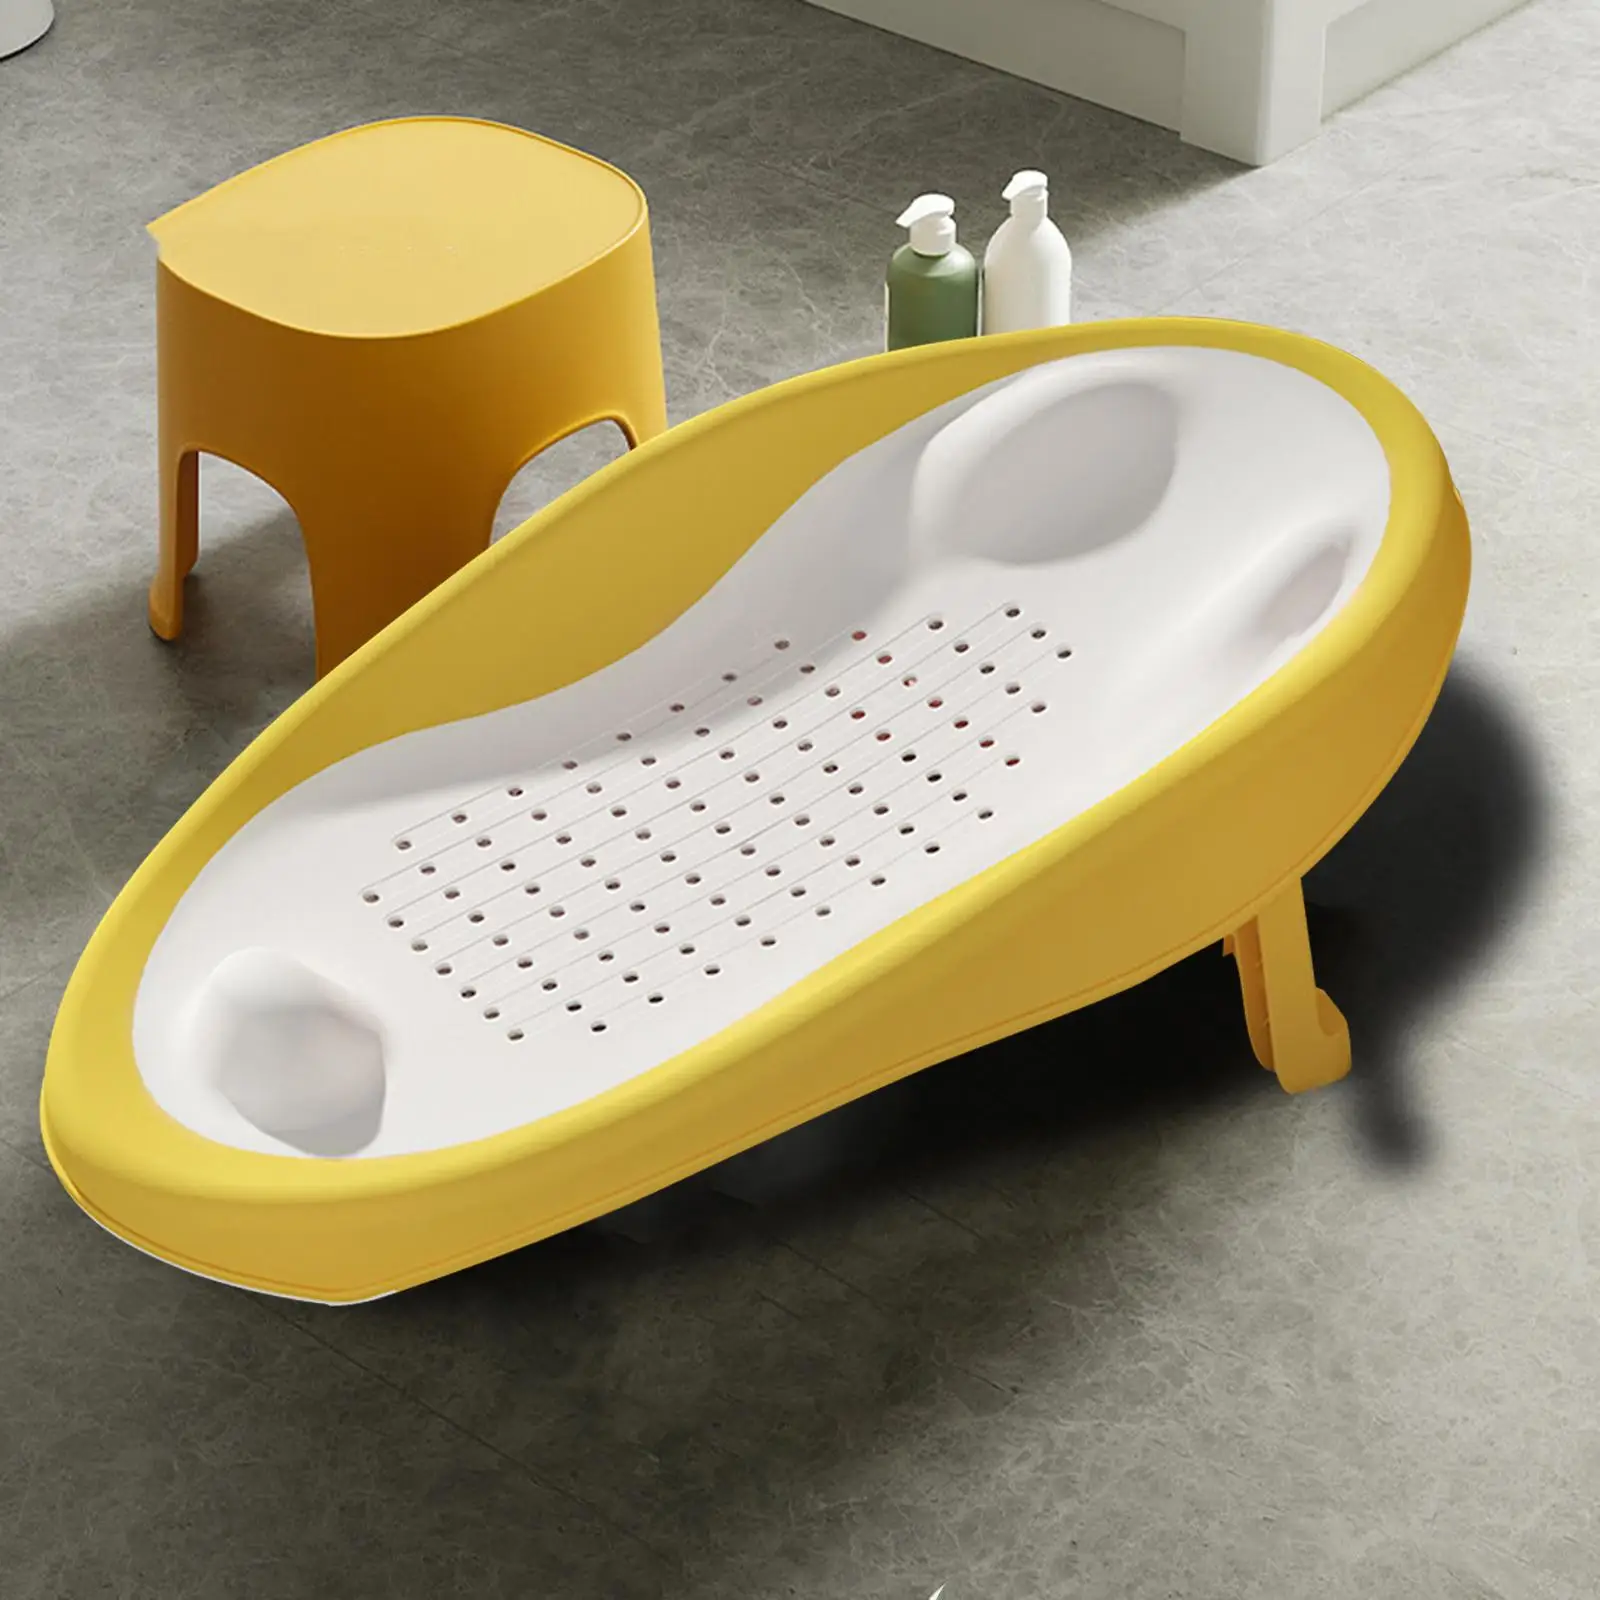 Baby Bath Support Multi Function Anti Slip Accessories Breathable Folding Bath Rack Bathing Seat Shower Support for Toddlers